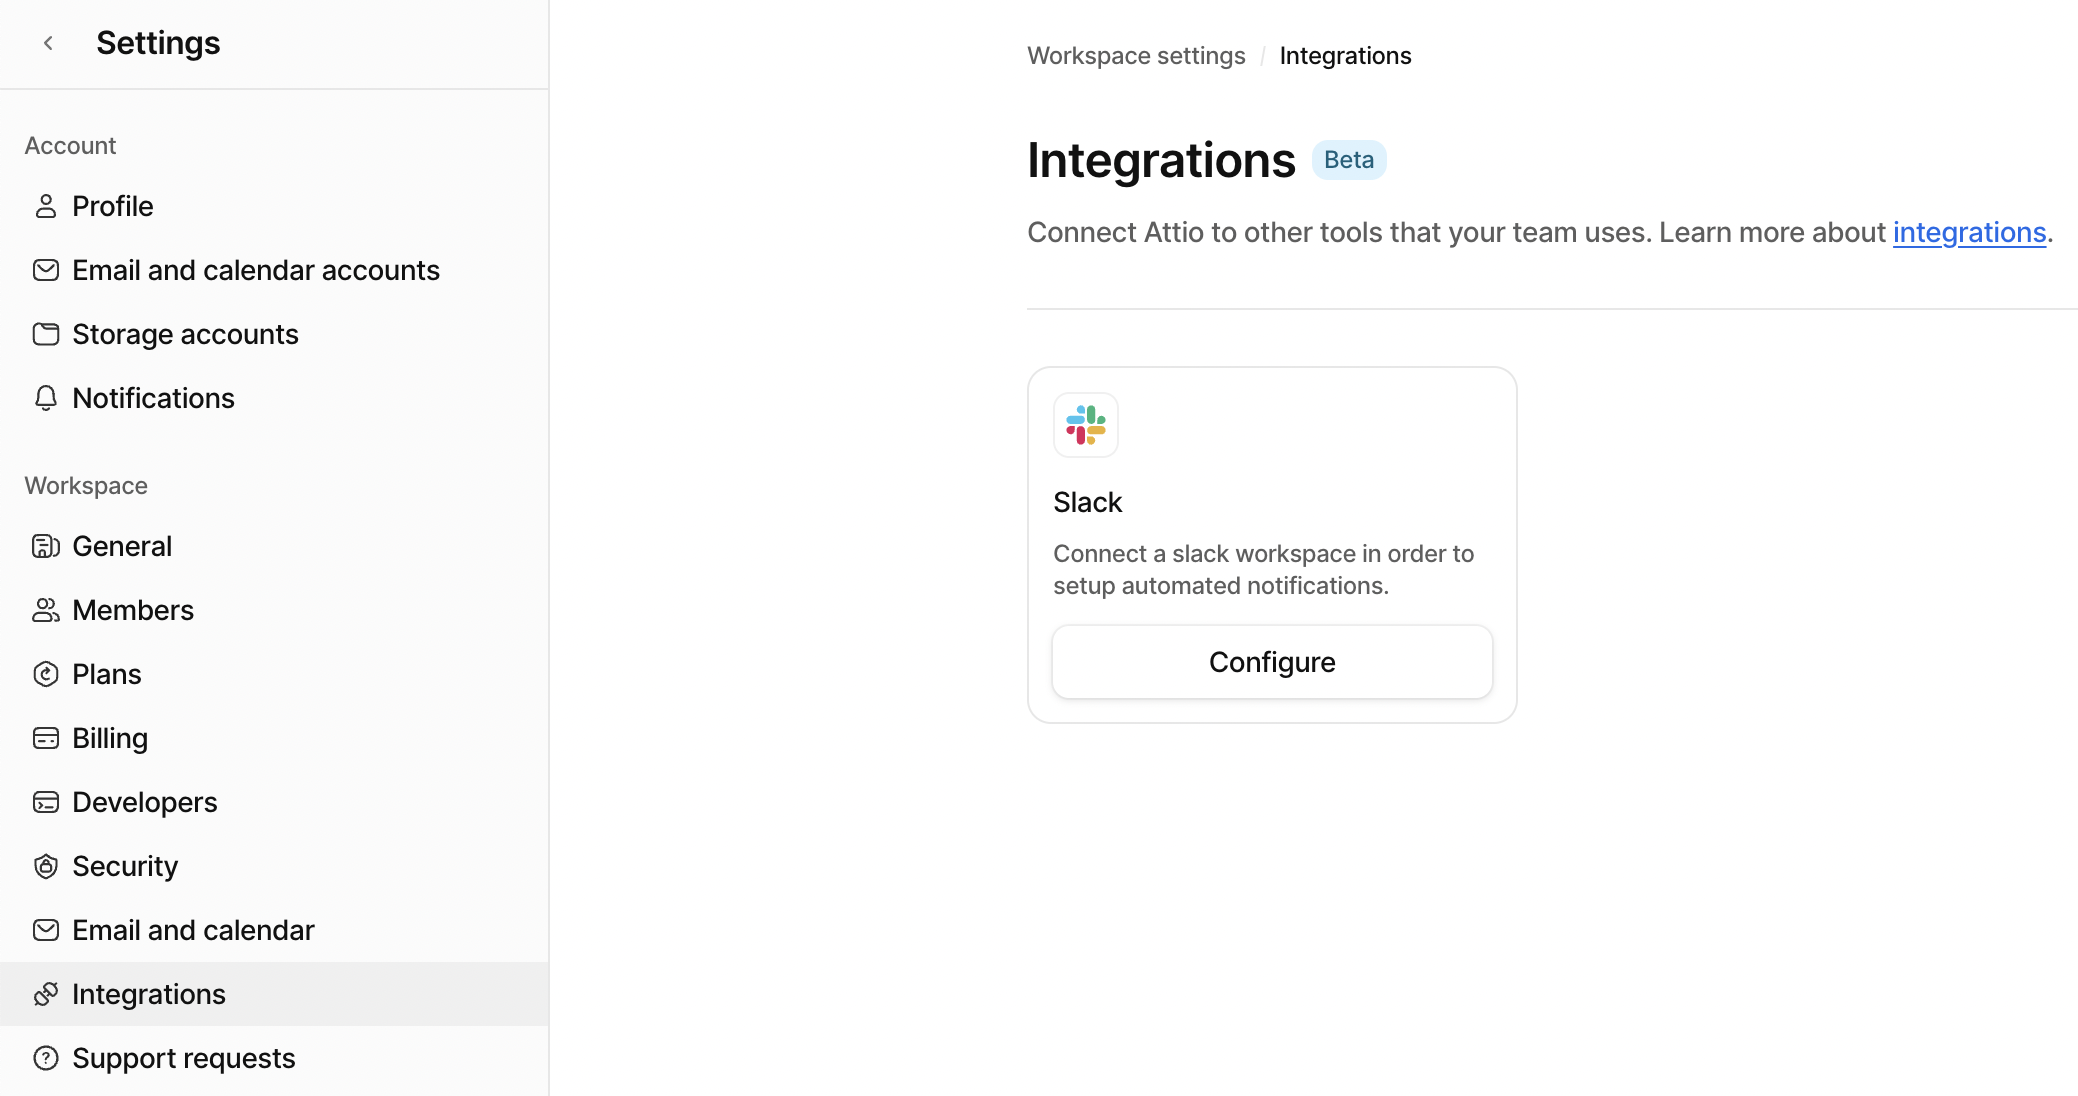 The Integrations page of Workspace settings shows an option to Configure a Slack integration